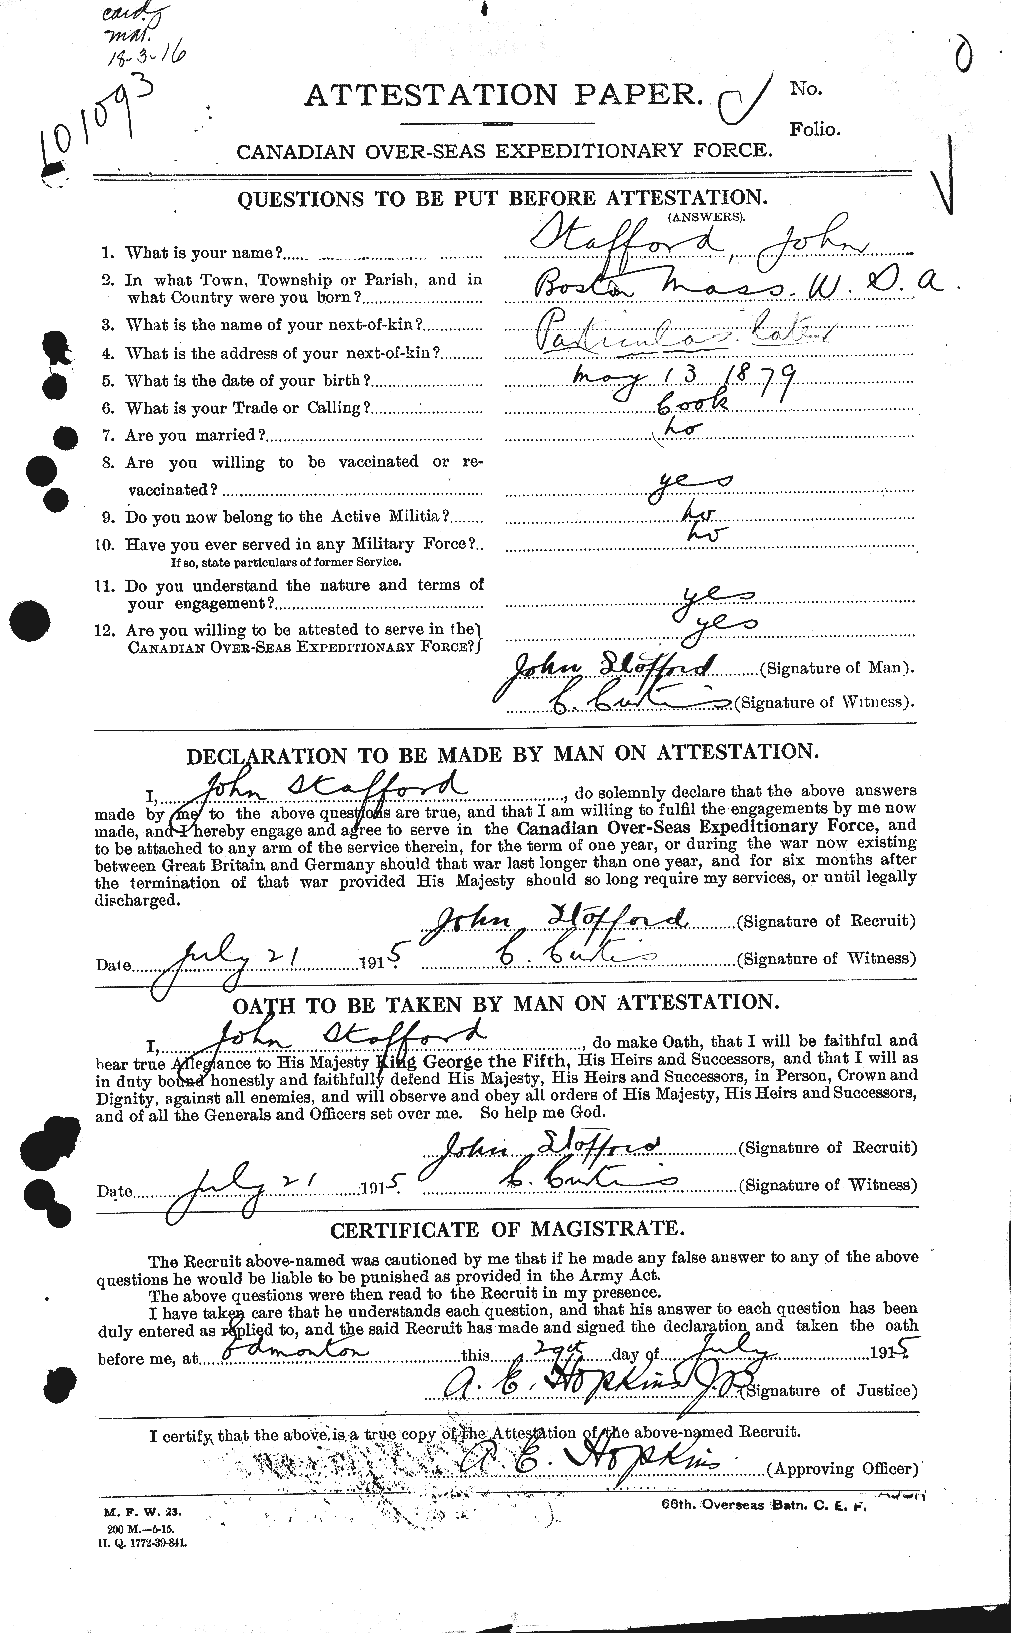 Personnel Records of the First World War - CEF 113259a